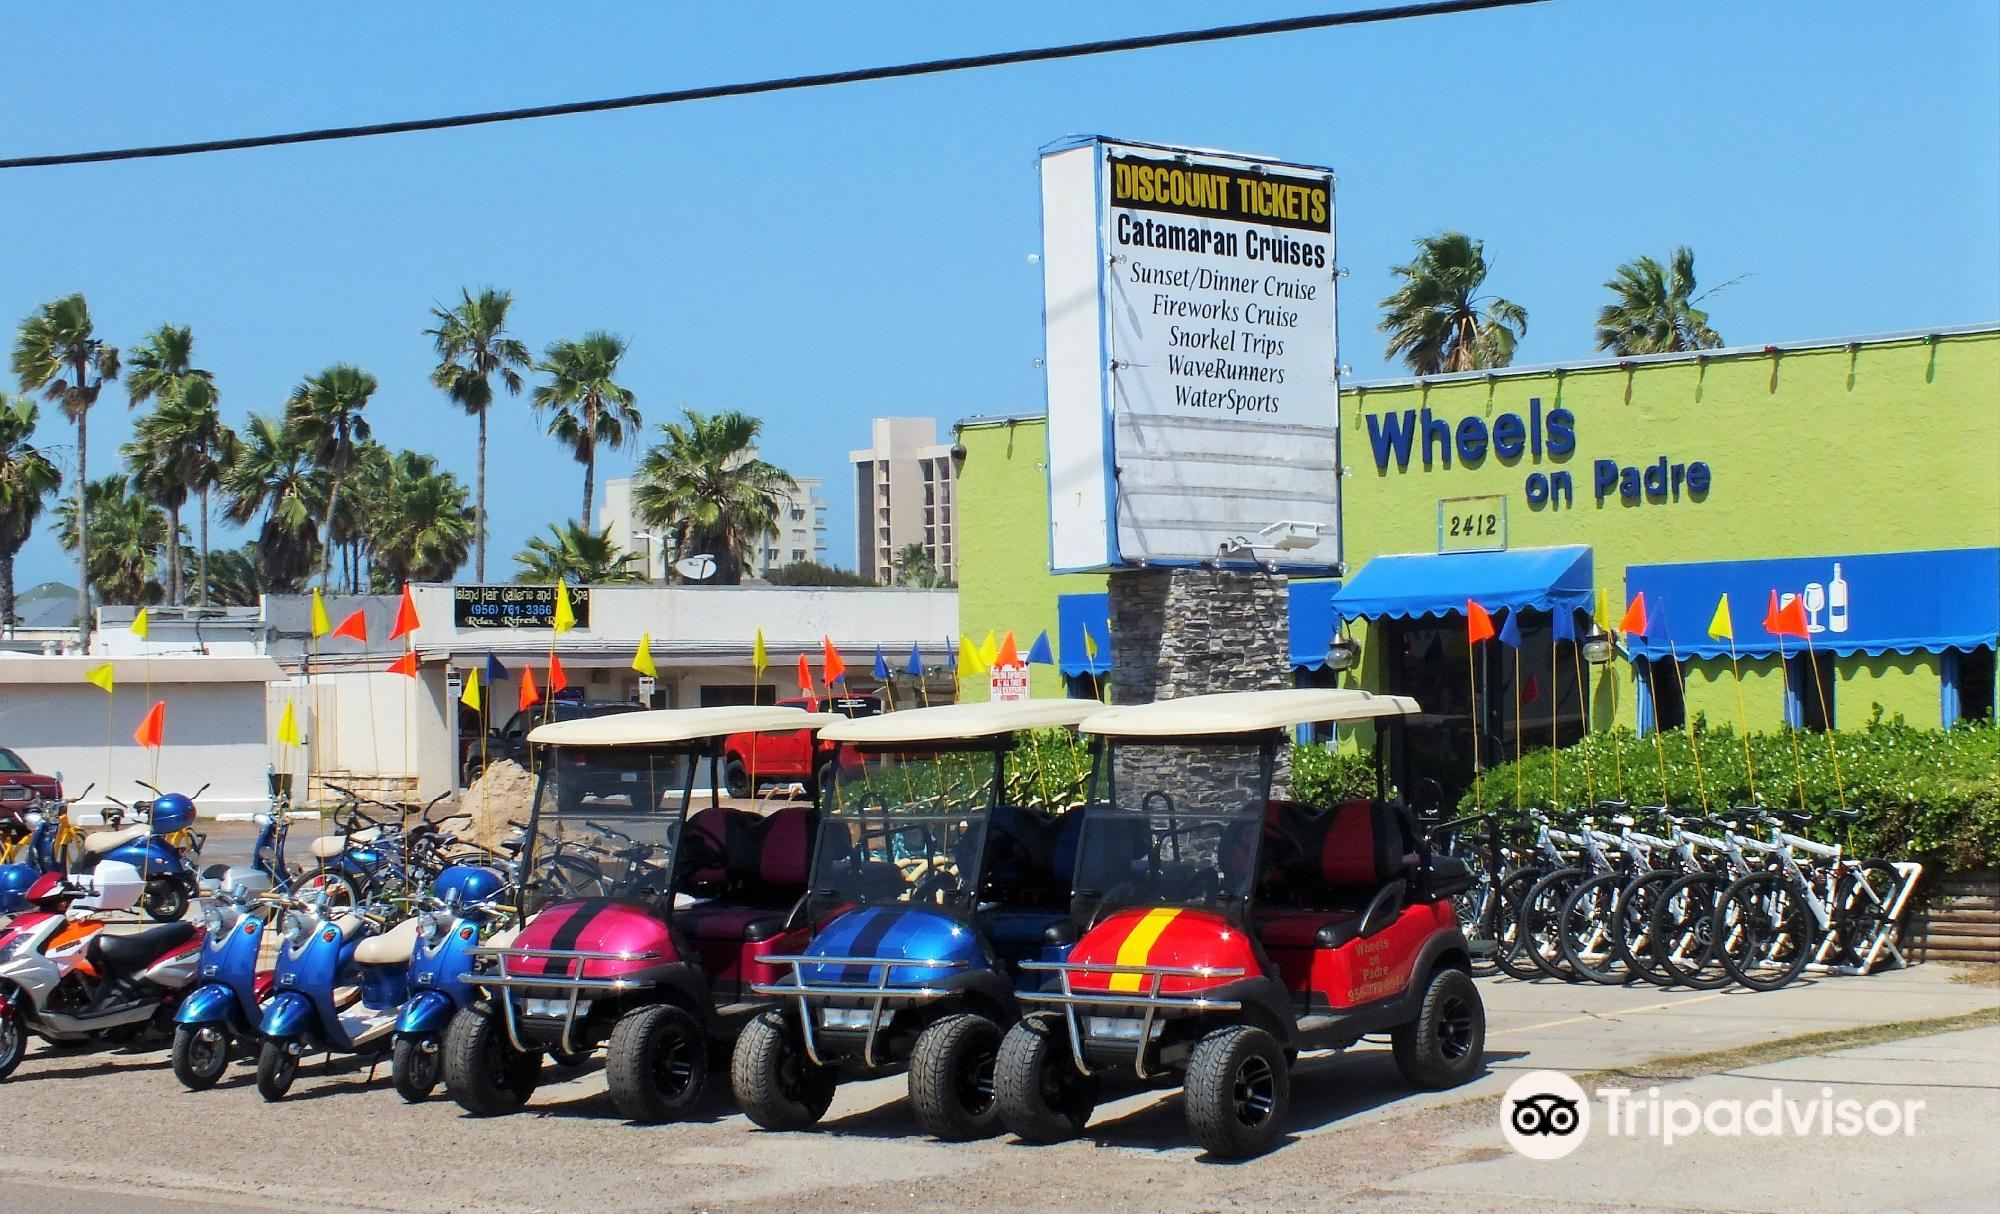 Wheels on Padre attraction reviews - Wheels on Padre tickets - Wheels on  Padre discounts - Wheels on Padre transportation, address, opening hours -  attractions, hotels, and food near Wheels on Padre 